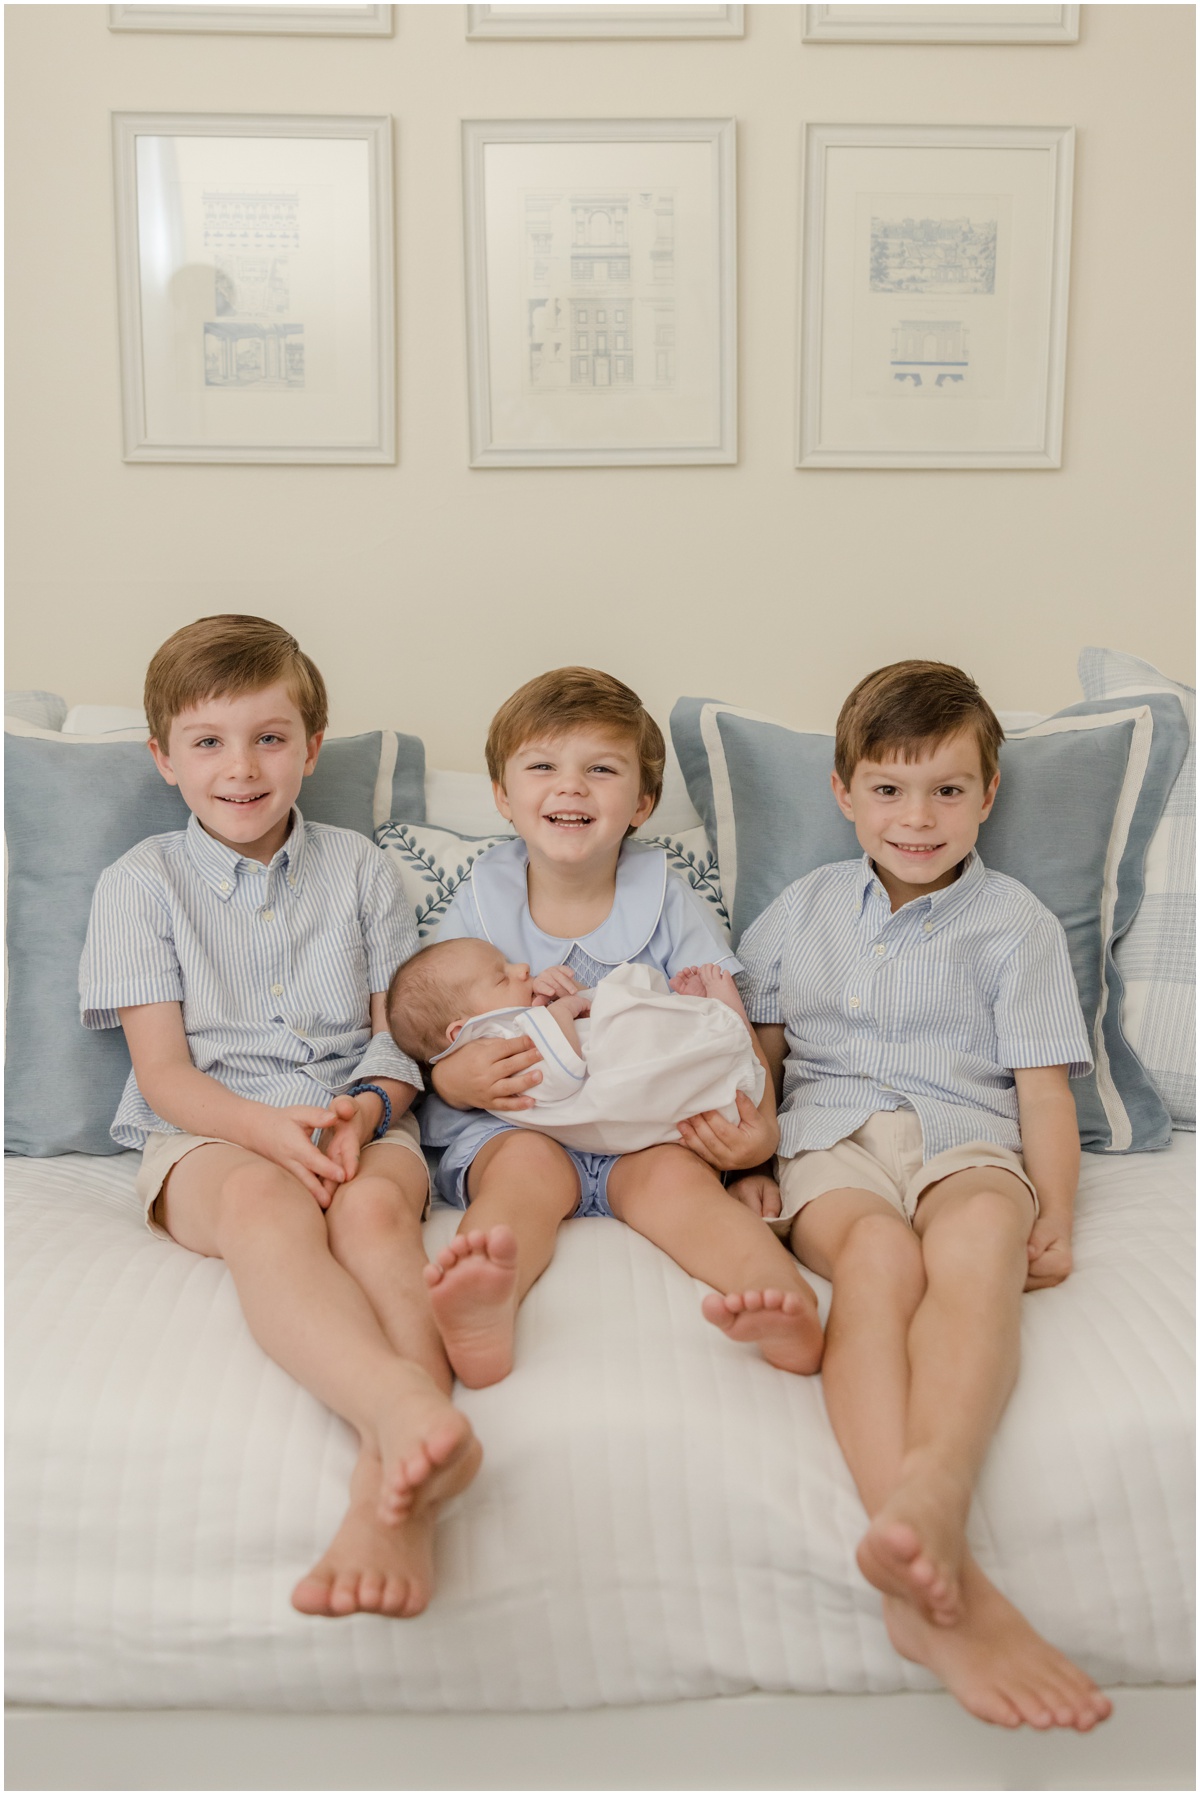 Greenville Newborn Photography of three young brothers smiling and holding their newborn baby brother.